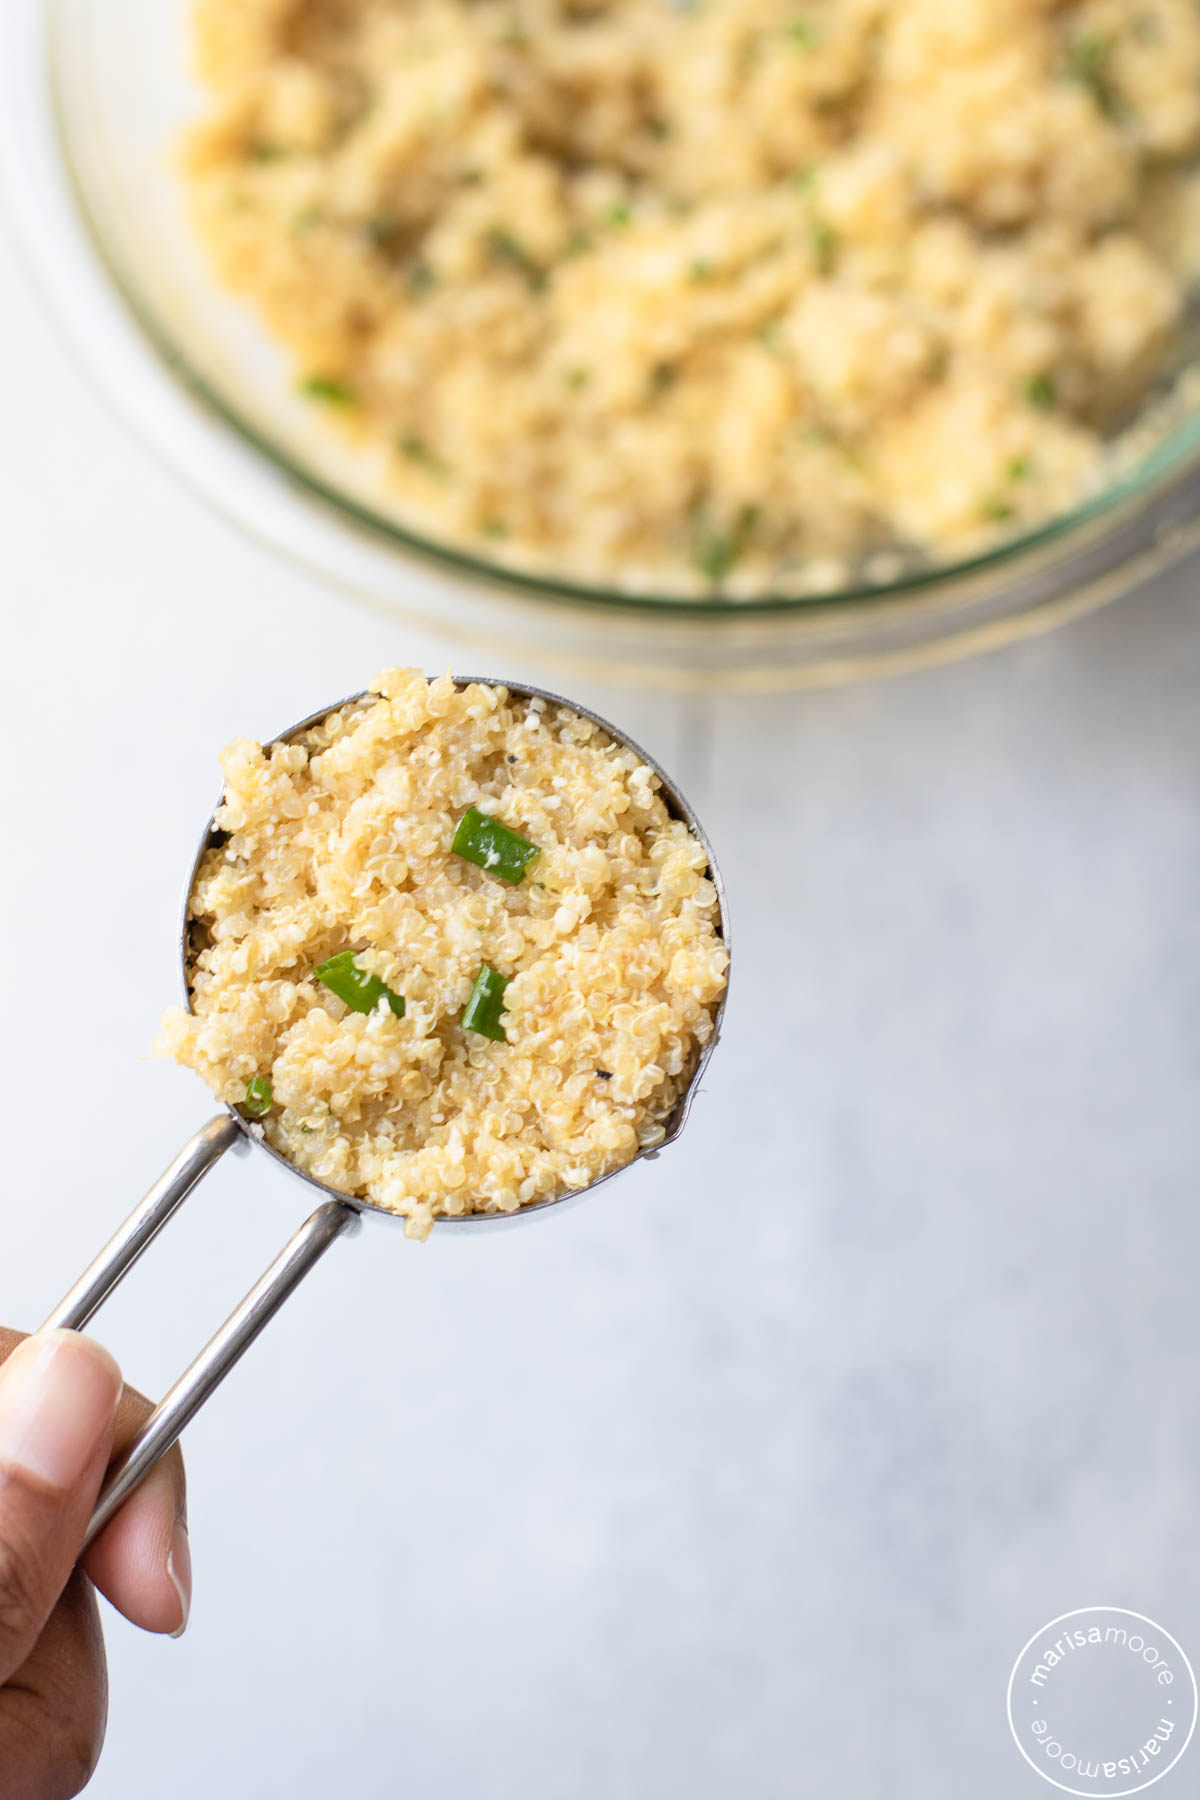 ⅓ cup measuring cup filled with the quinoa patty mixture 